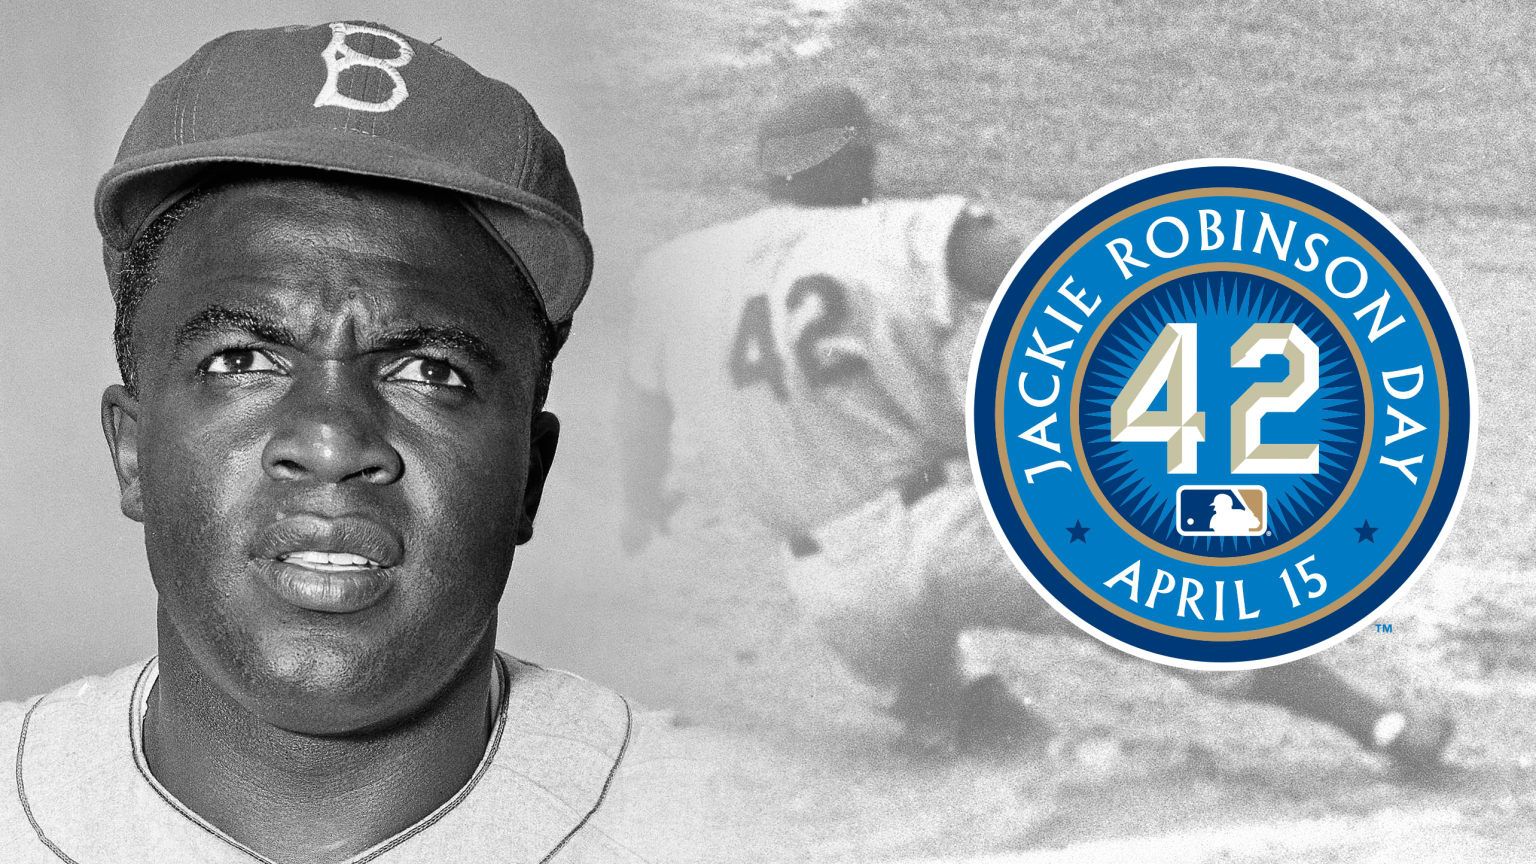 pee wee reese jackie robinson famous photo